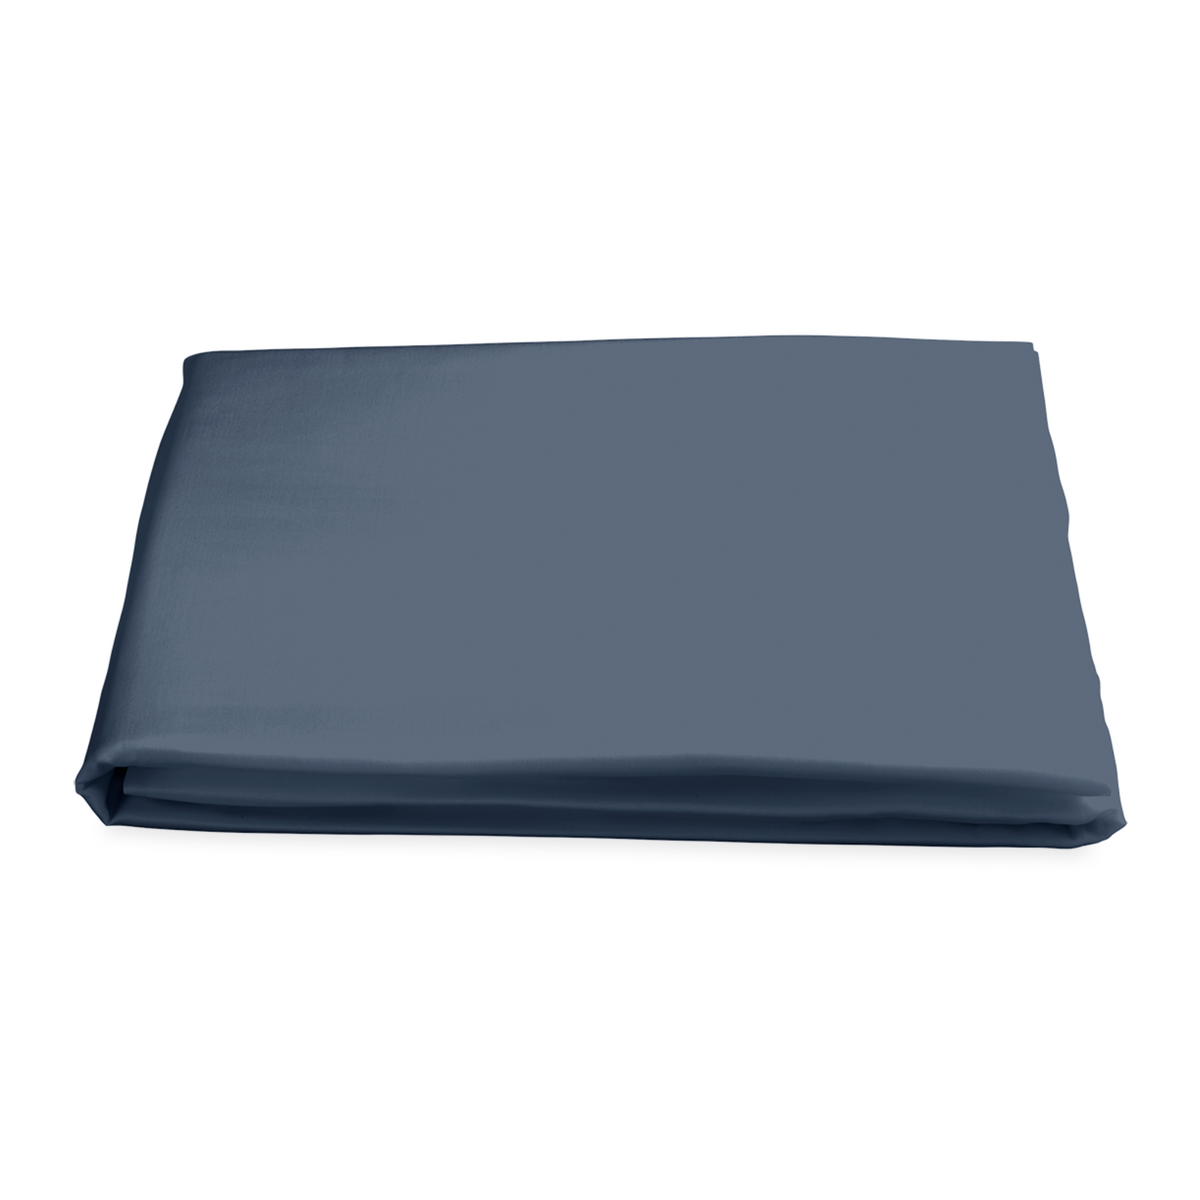 Fitted Sheet of Matouk Nocturne Bedding in Steel Blue Color